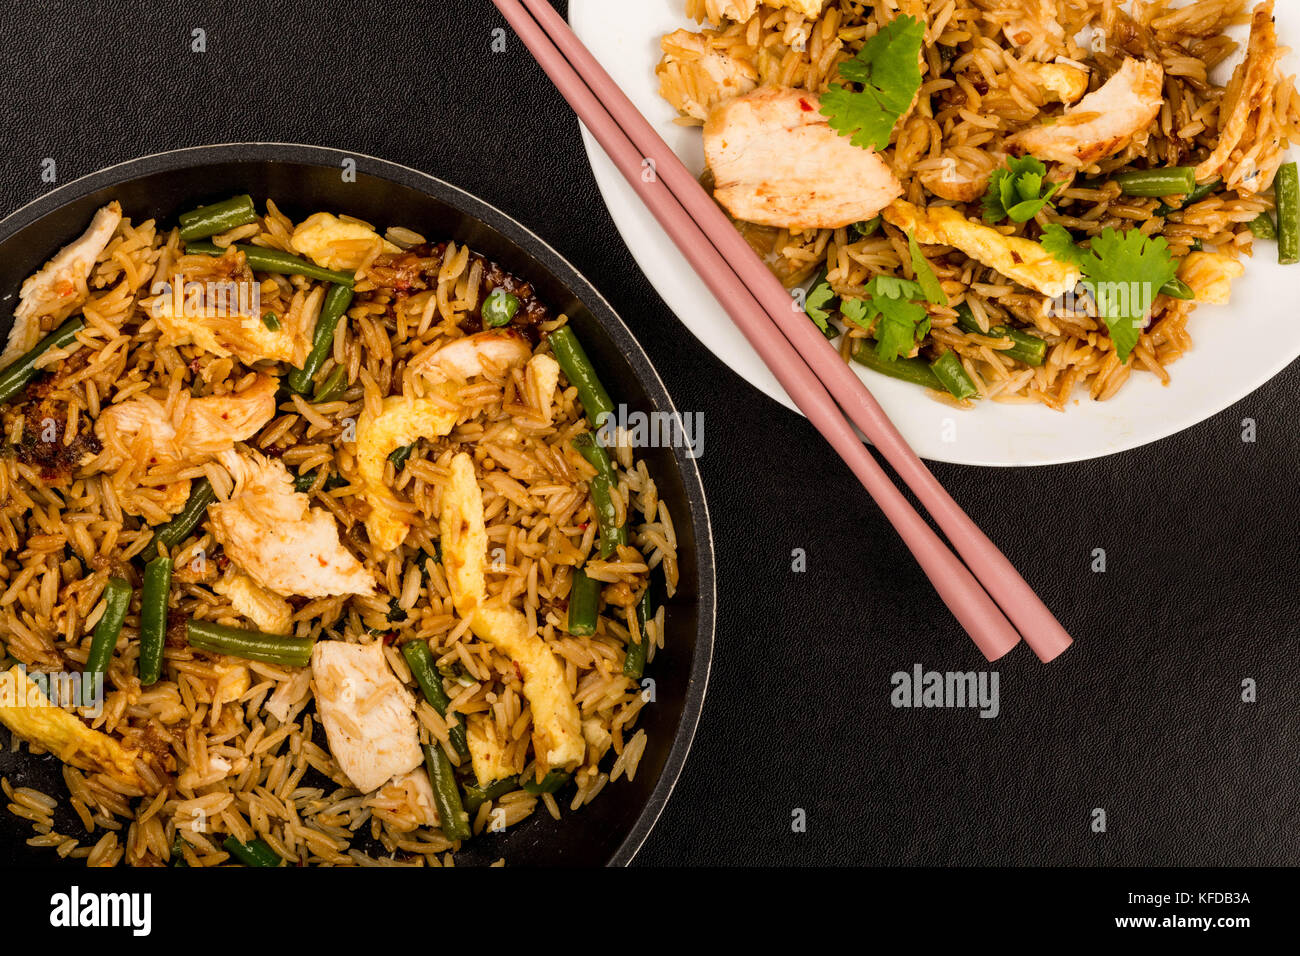 Indonesian Style Nasi Goreng Chicken and Rice Meal Against a Black Background With Chop Sticks Stock Photo